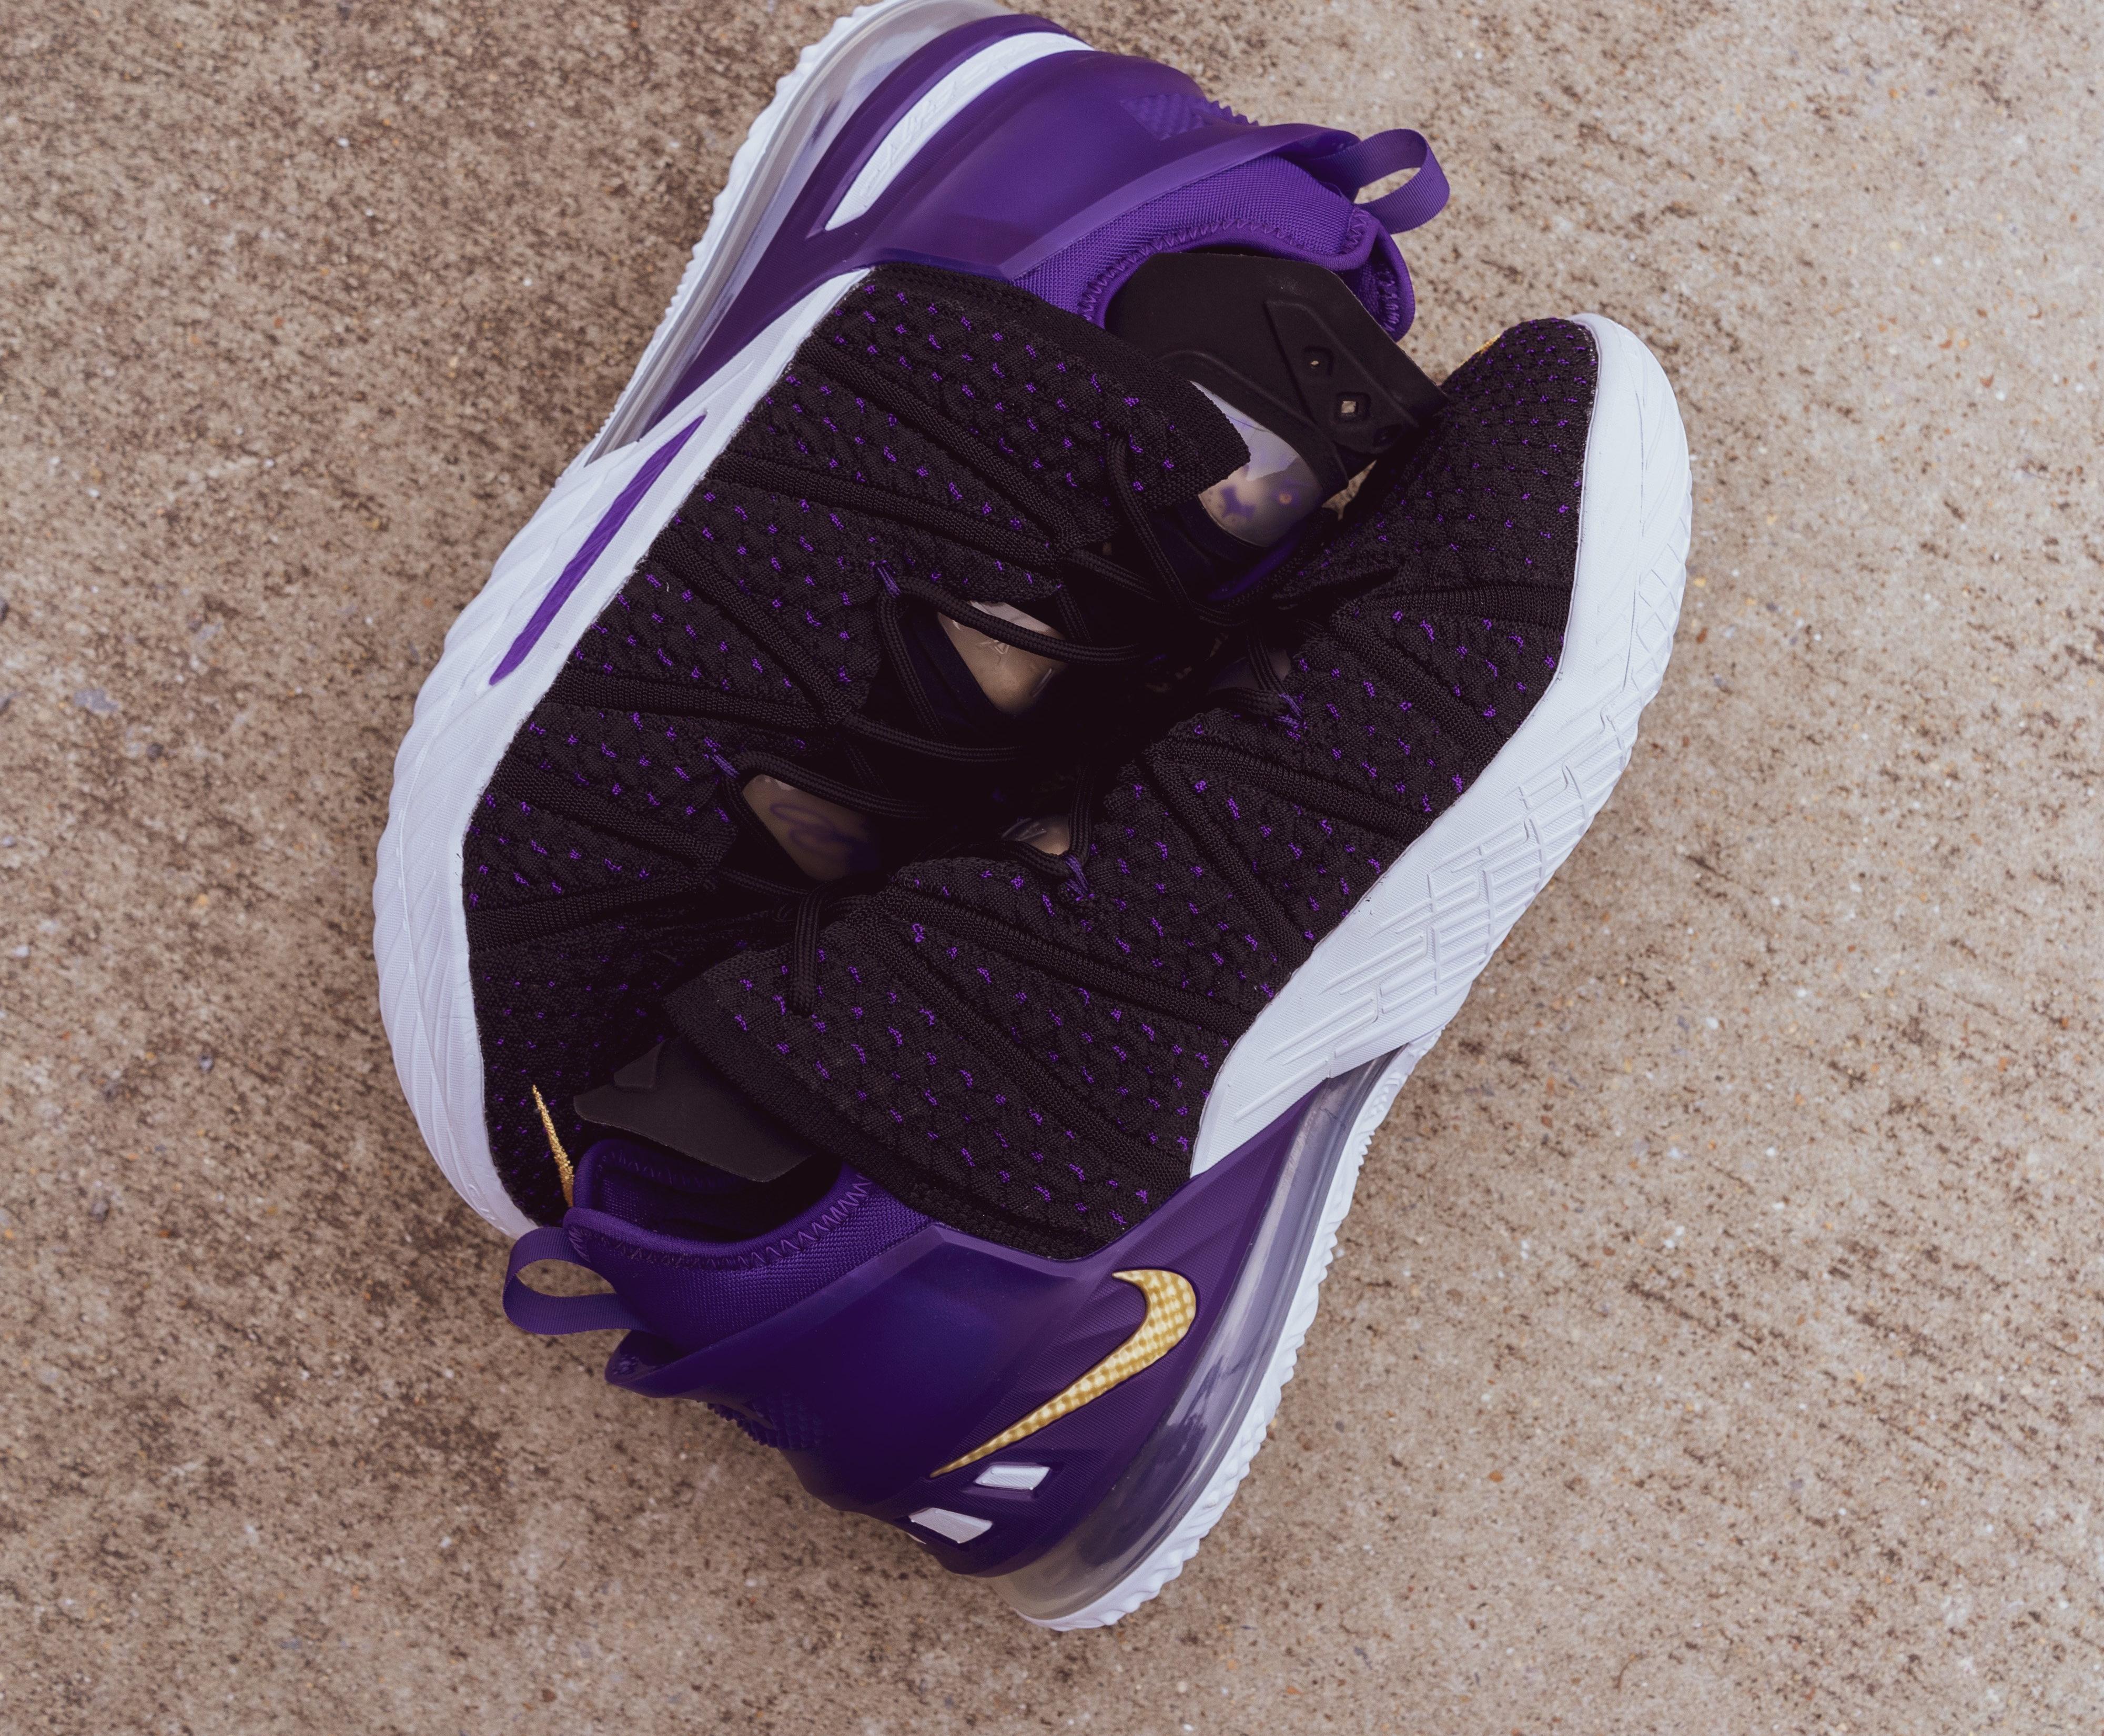 LeBron 18 shoes: Lakers star to wear new 'LeBron James' Nike